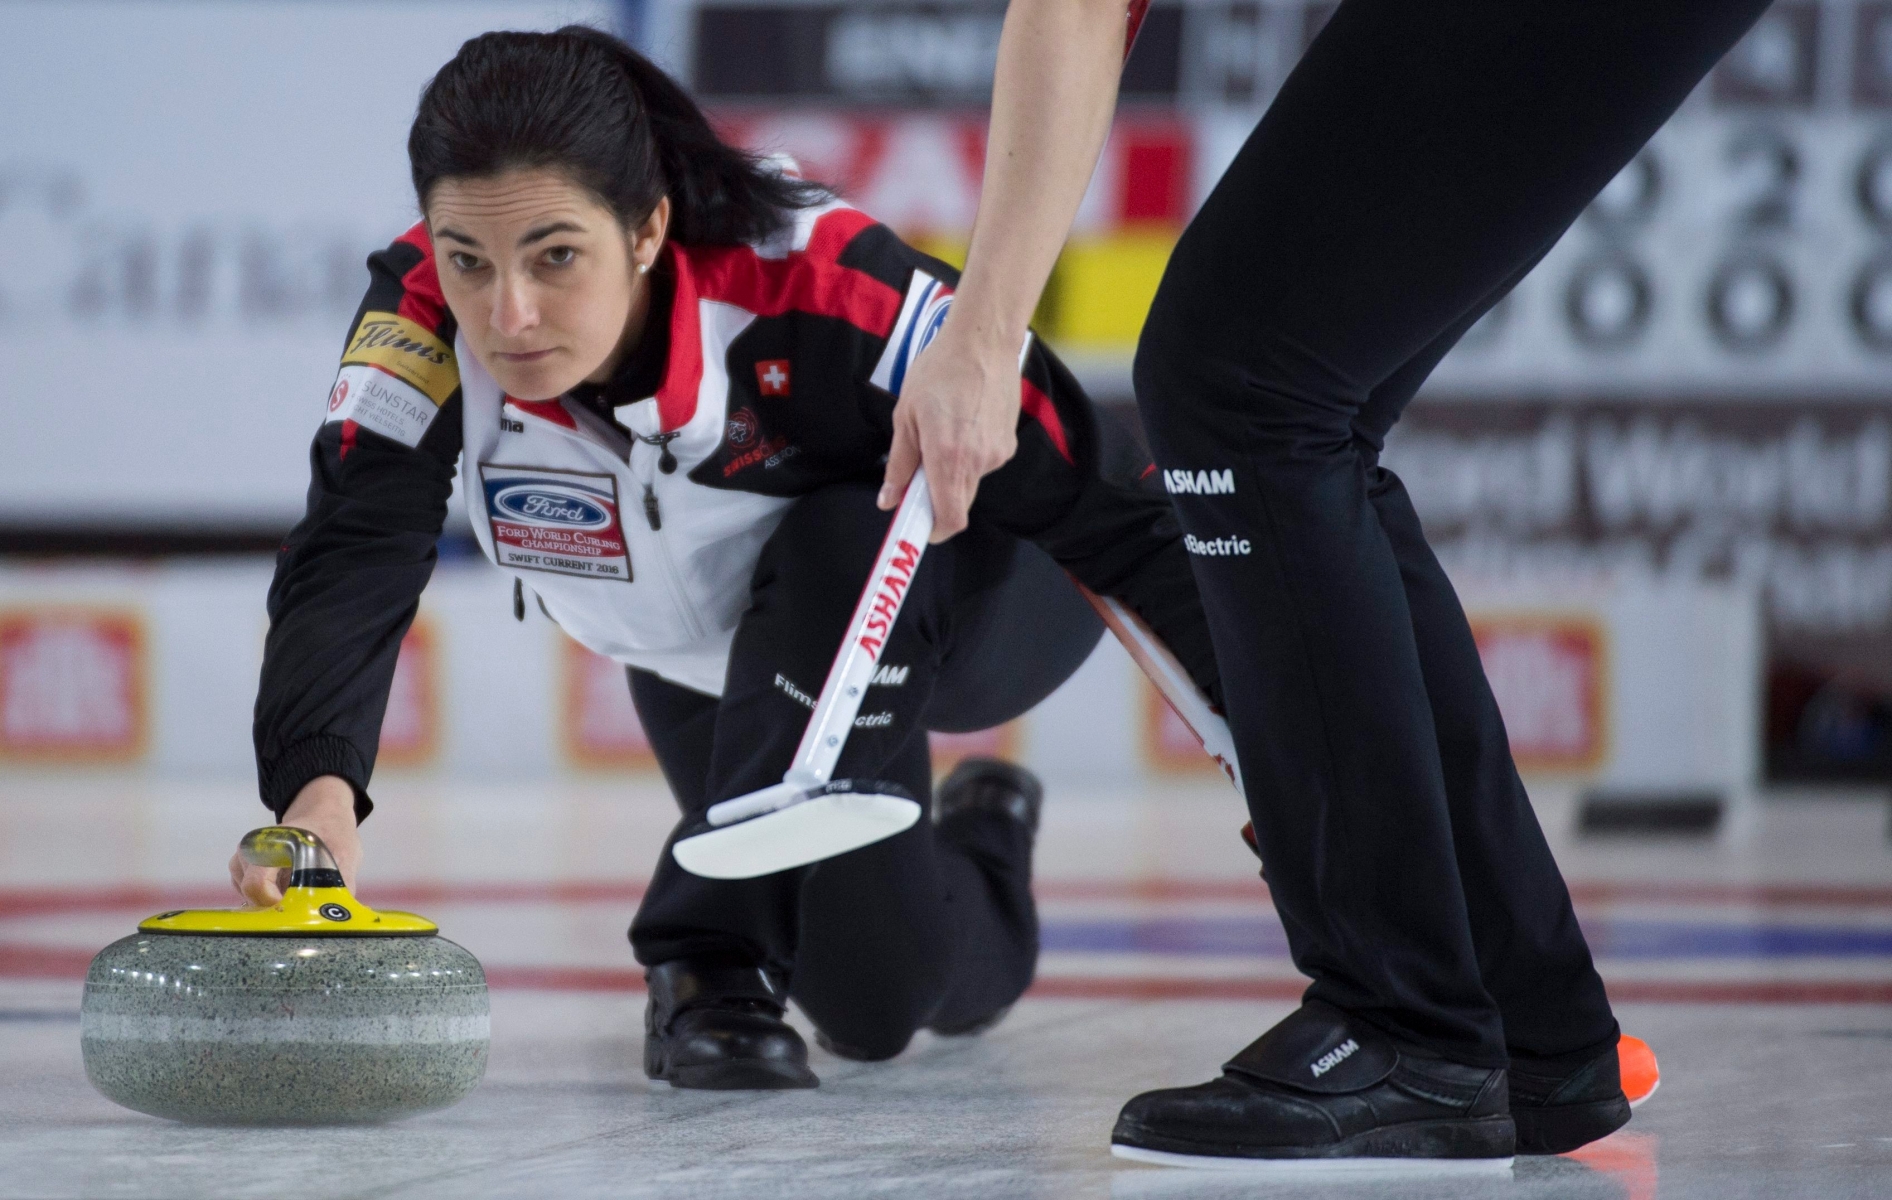 Switzerland skip Binia Feltscher makes a shot during the 3rd draw against Canada at the Women's World Curling Championship in Swift Current, Saskatchewan, Canada, Sunday, March 20, 2016. (Jonathan Hayward/The Canadian Press via AP) MANDATORY CREDIT Canada Womens World Championship Curling